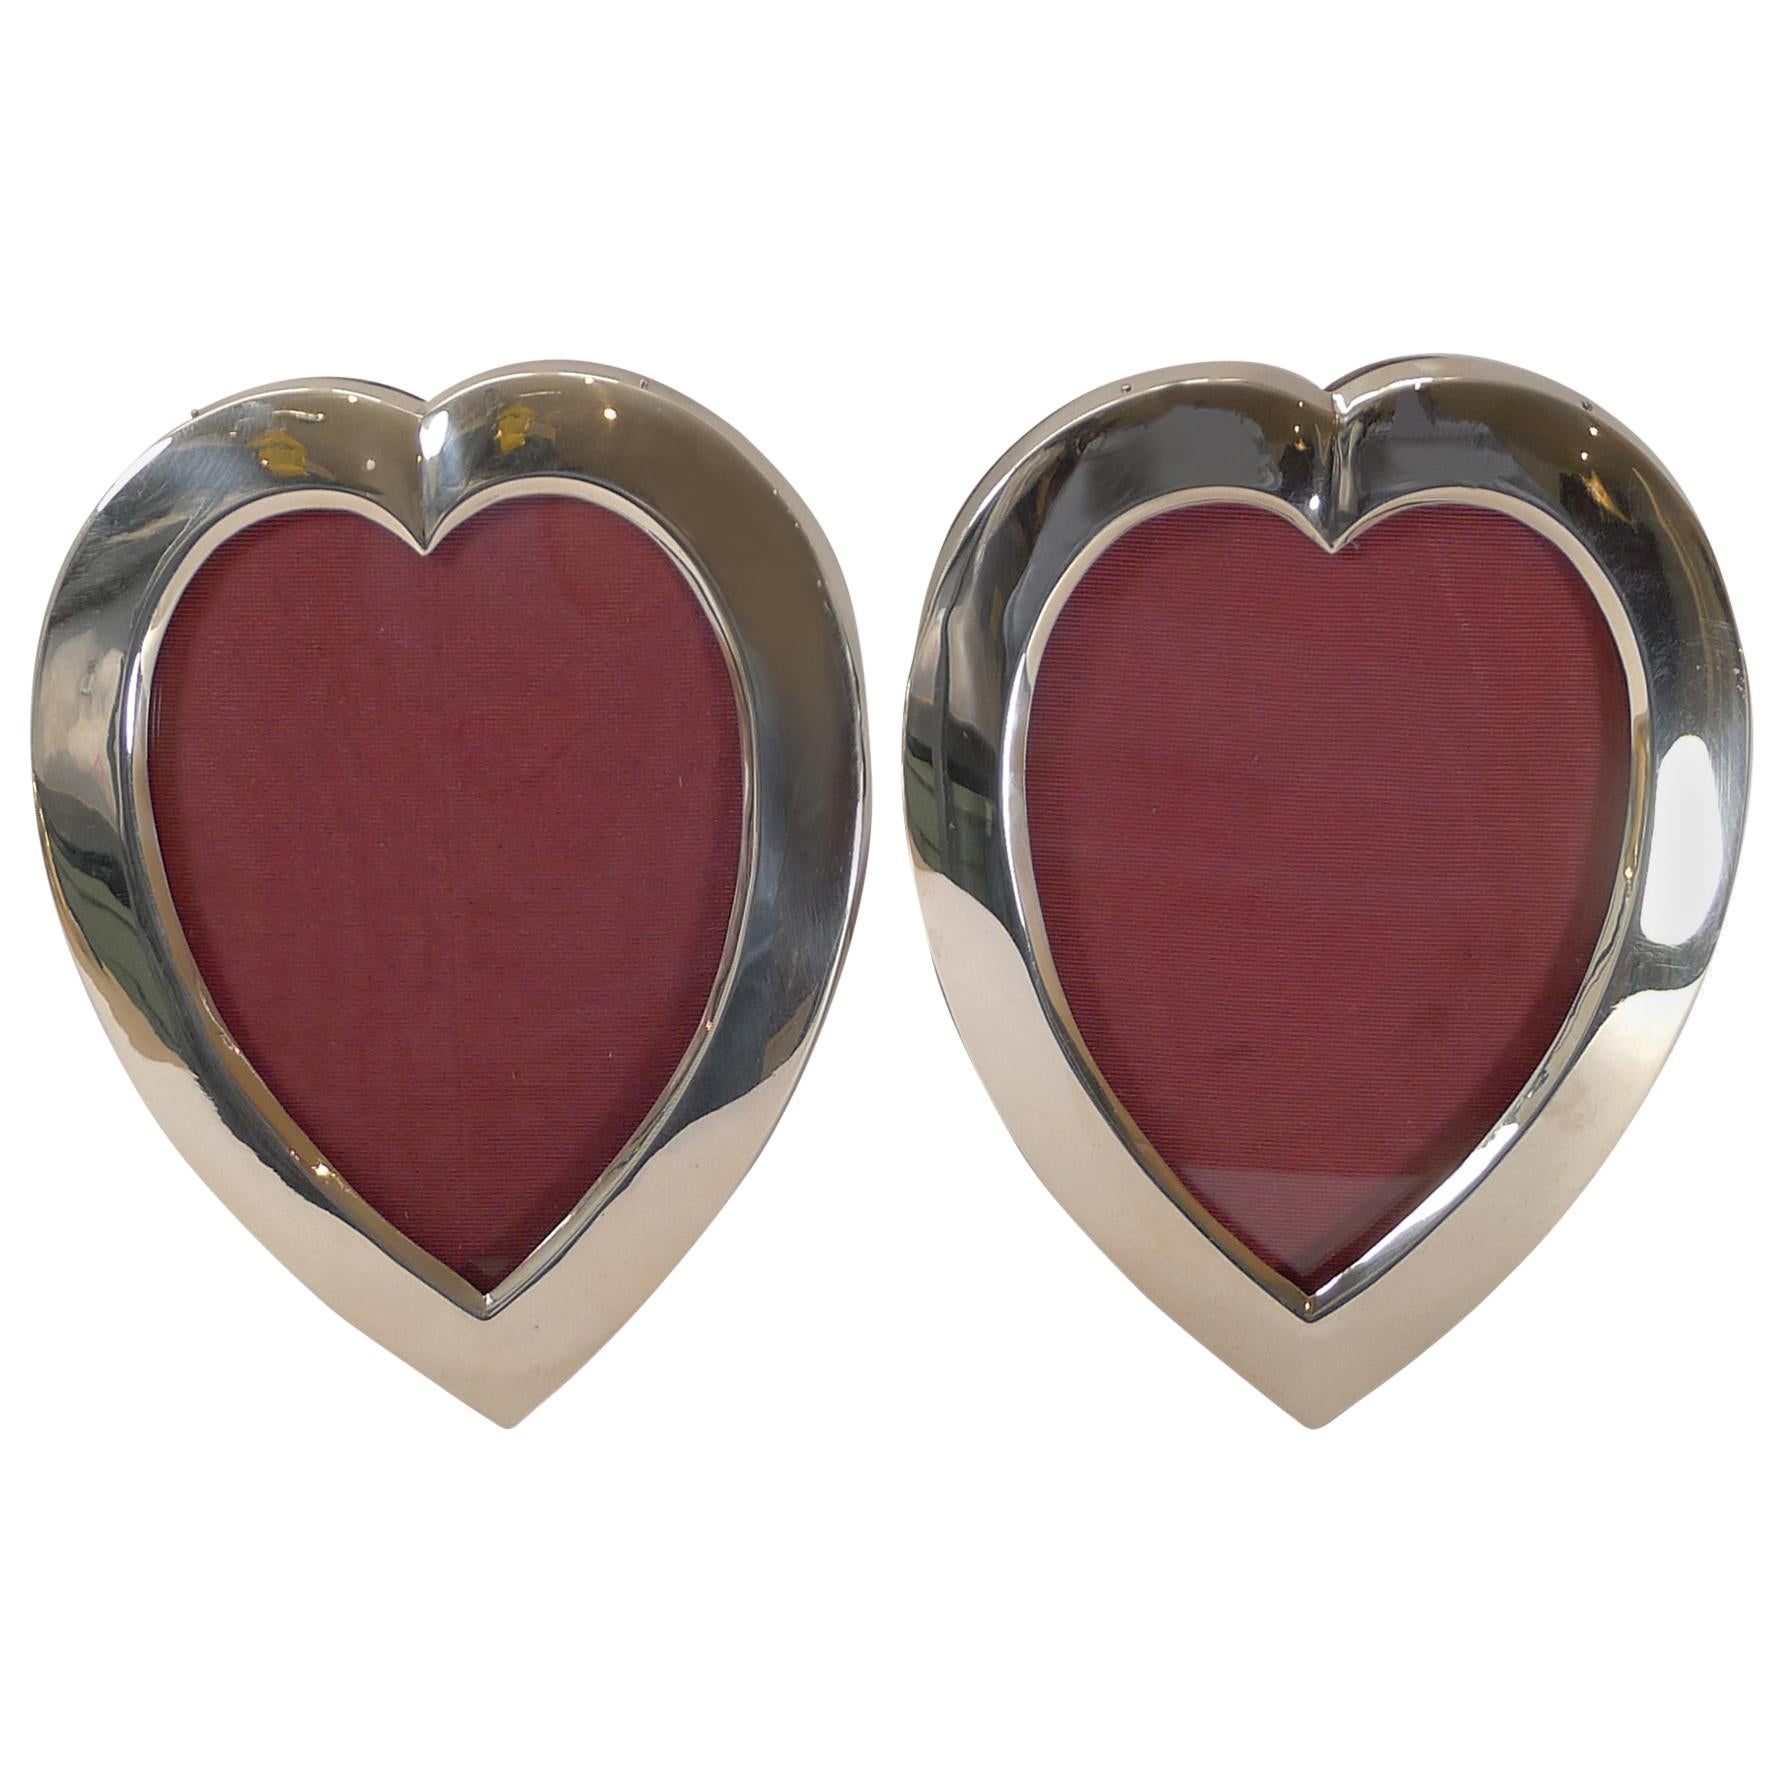 Pair of Antique English Sterling Silver Heart Picture Frames by William Comyns